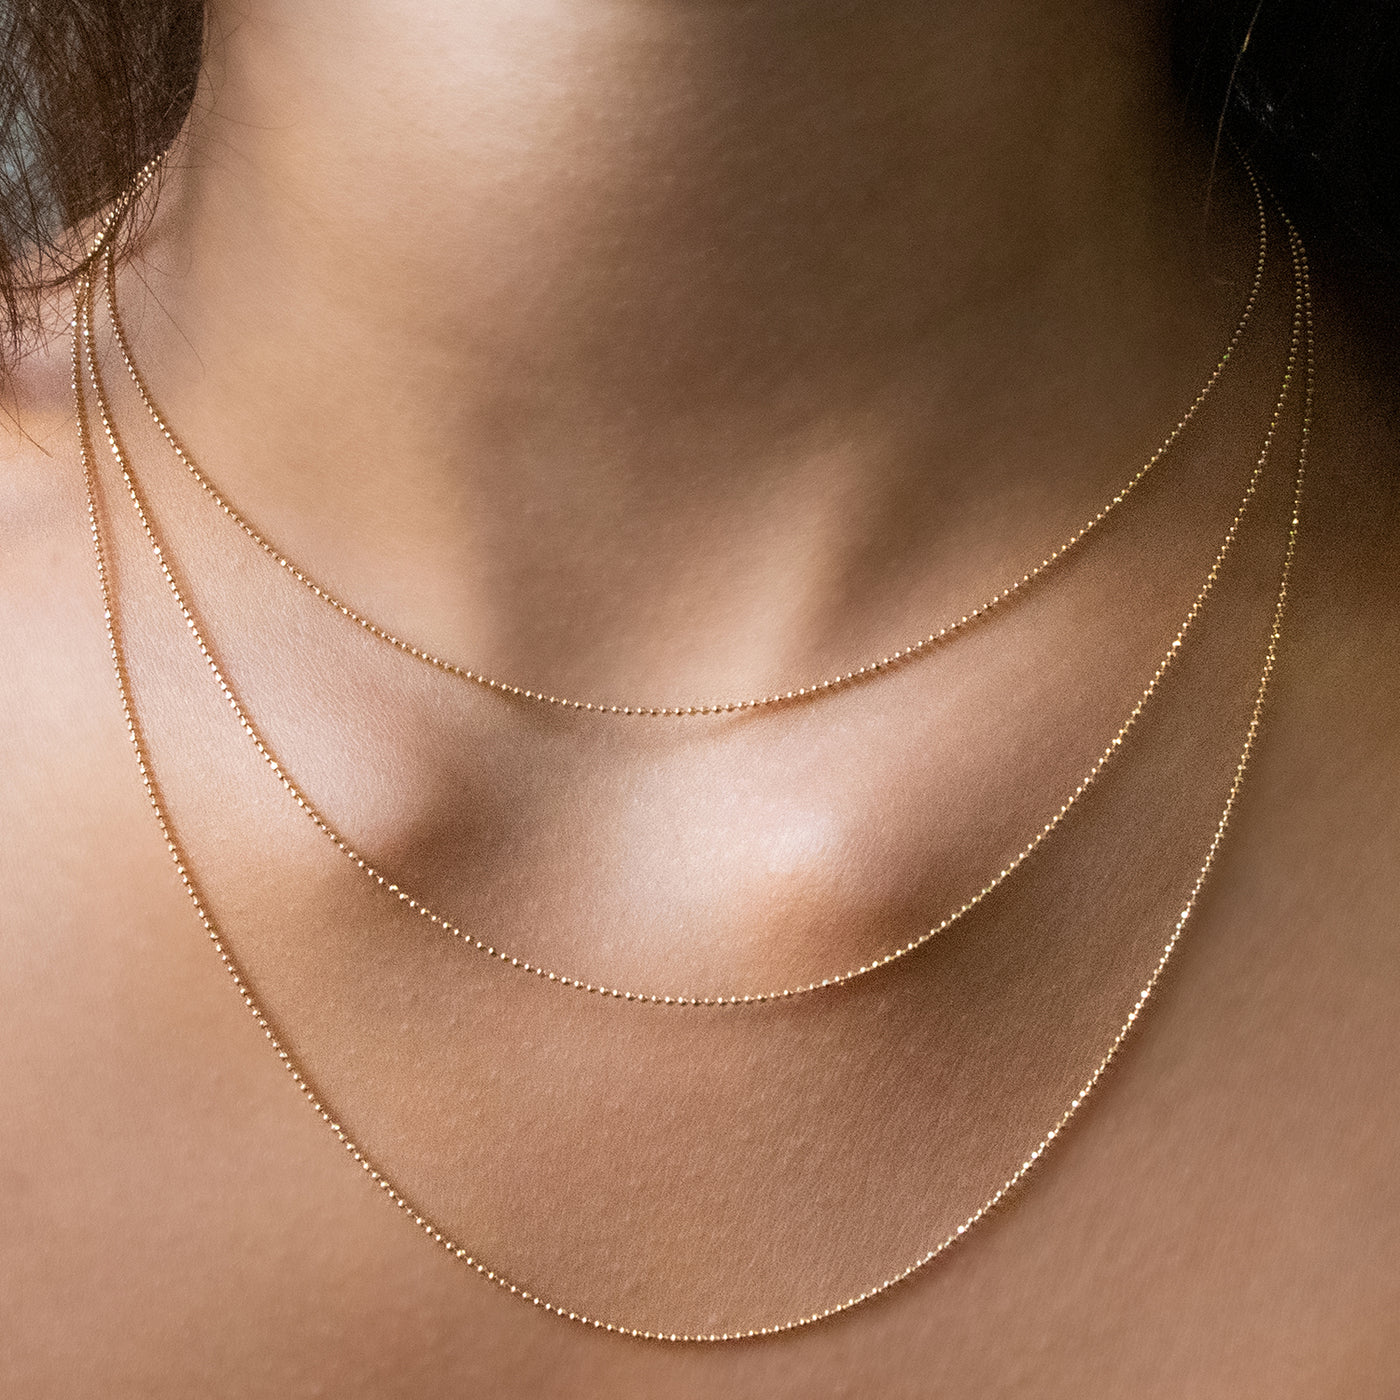 Disco Chain in 14kt Gold - 1.5 mm